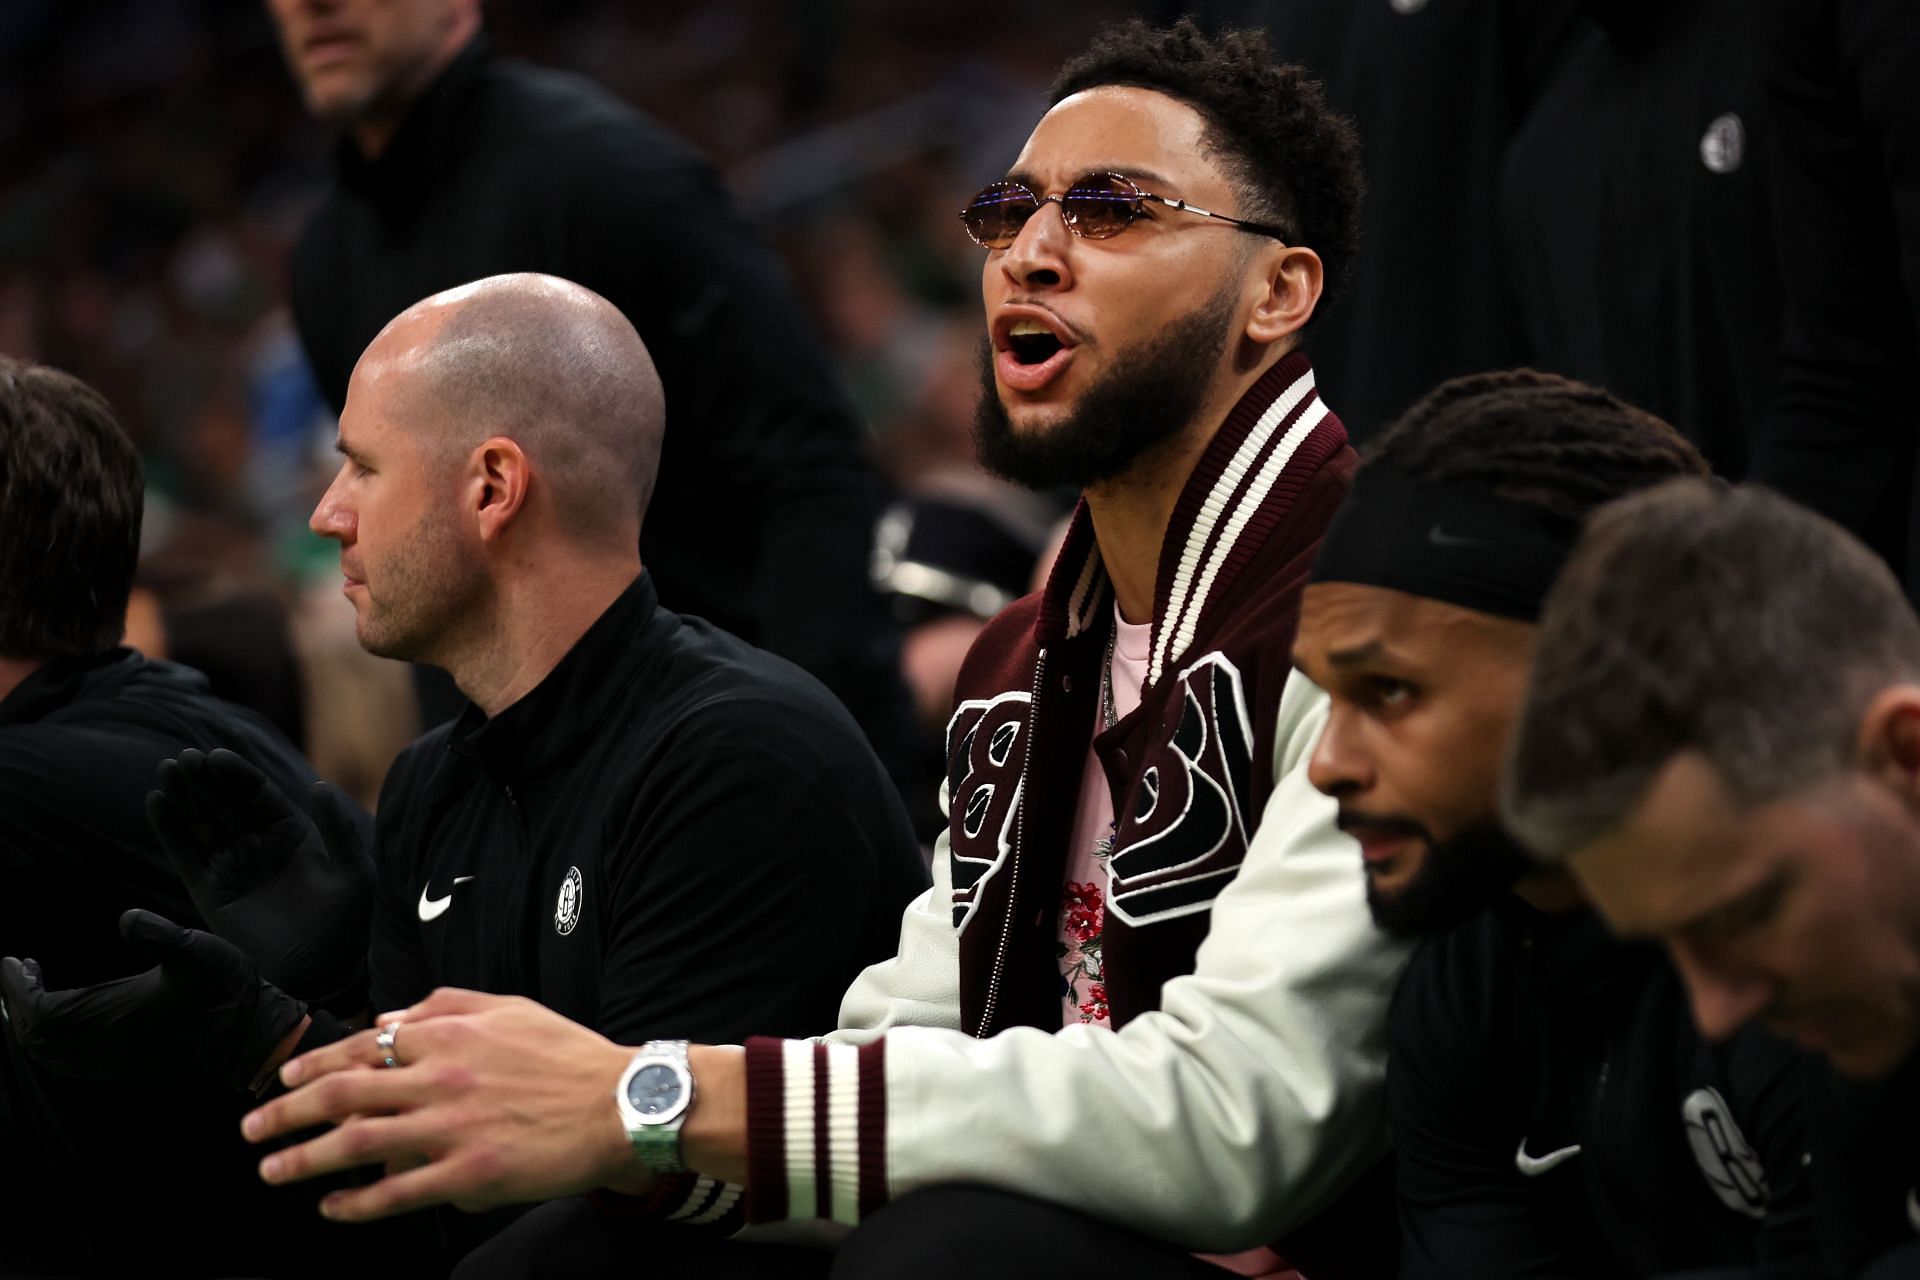 Ben Simmons watching the game against the Boston Celtics from the sideline